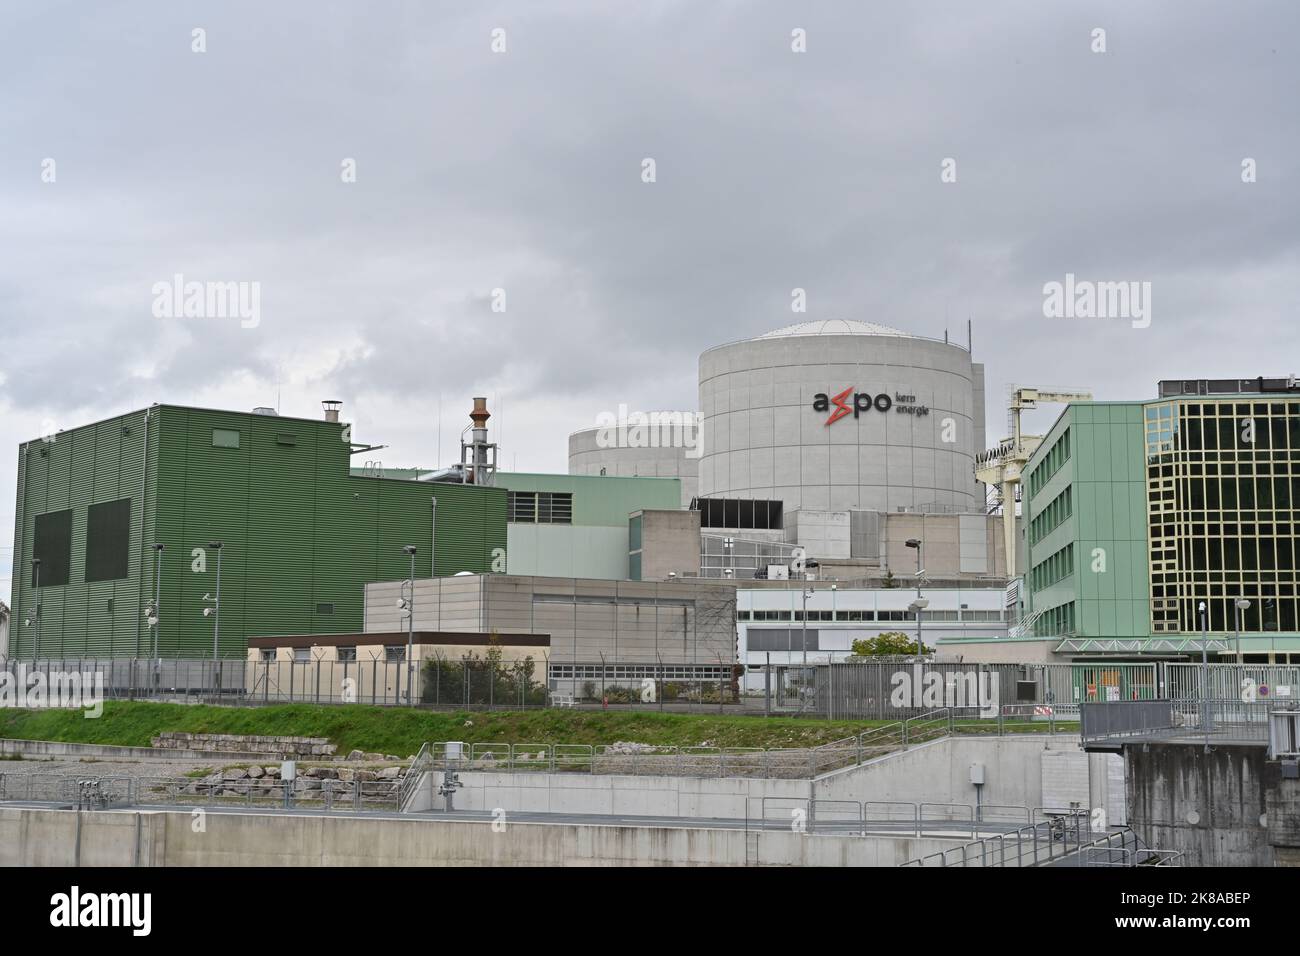 Direct view on a nuclear power plant Beznau, owned by Axpo, from the bank of river Aare. Stock Photo